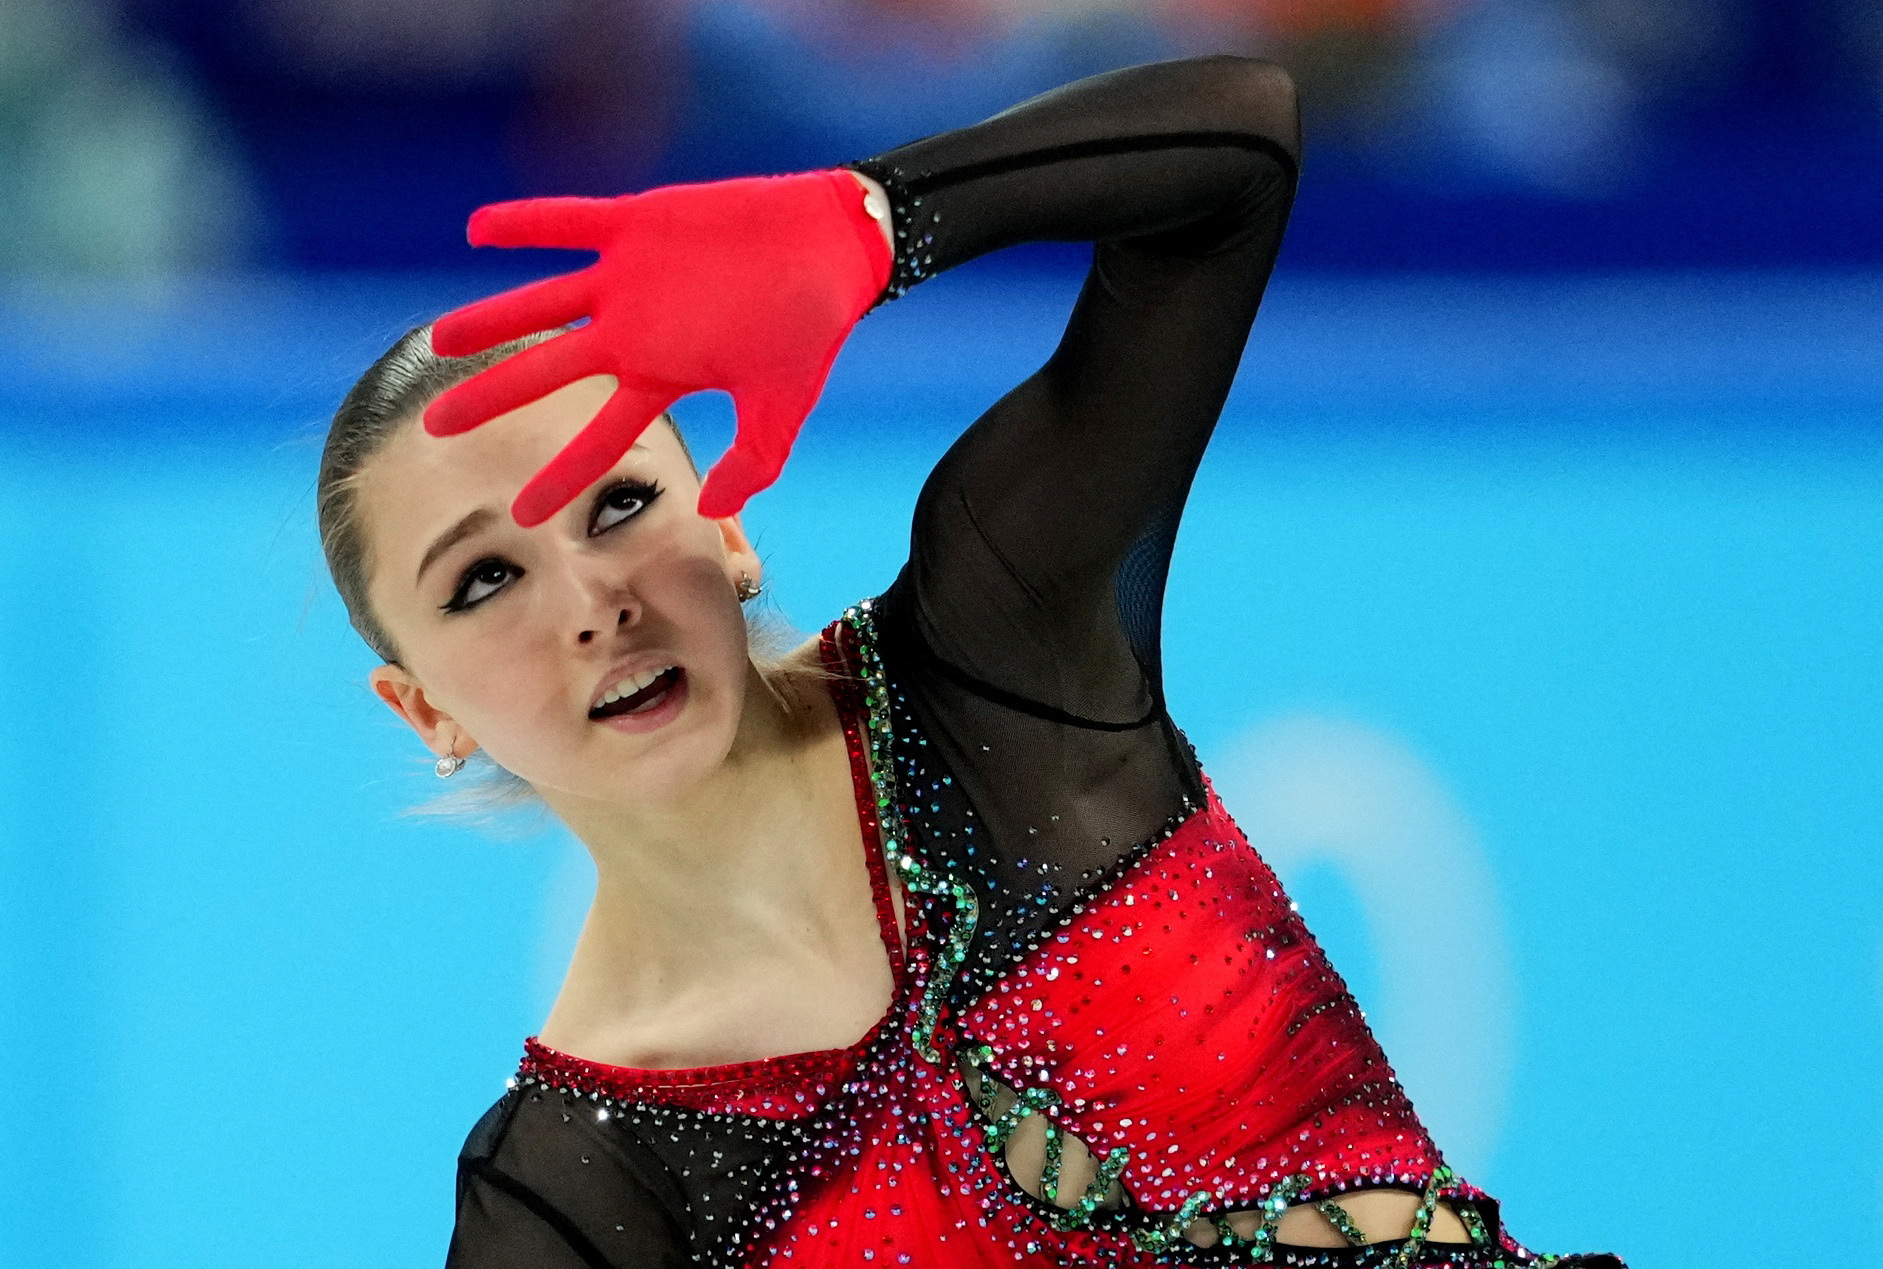 US figure skater Zhou slams anti-doping systems failures ahead of Valieva hearing Reuters